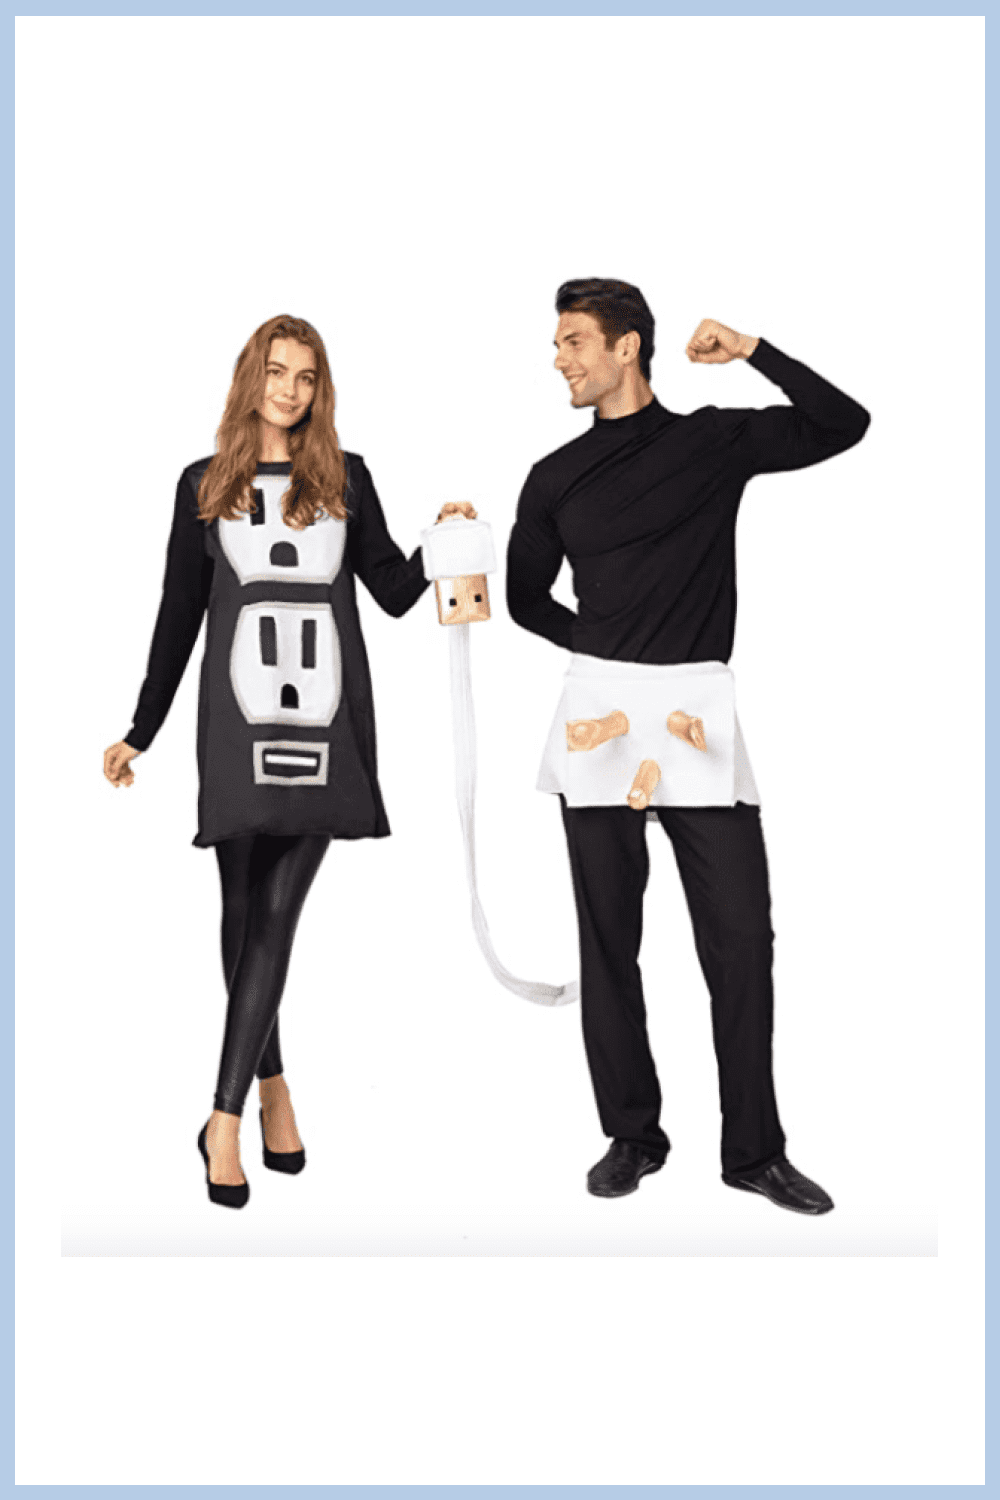 This costume is for adults only, maybe only for two.